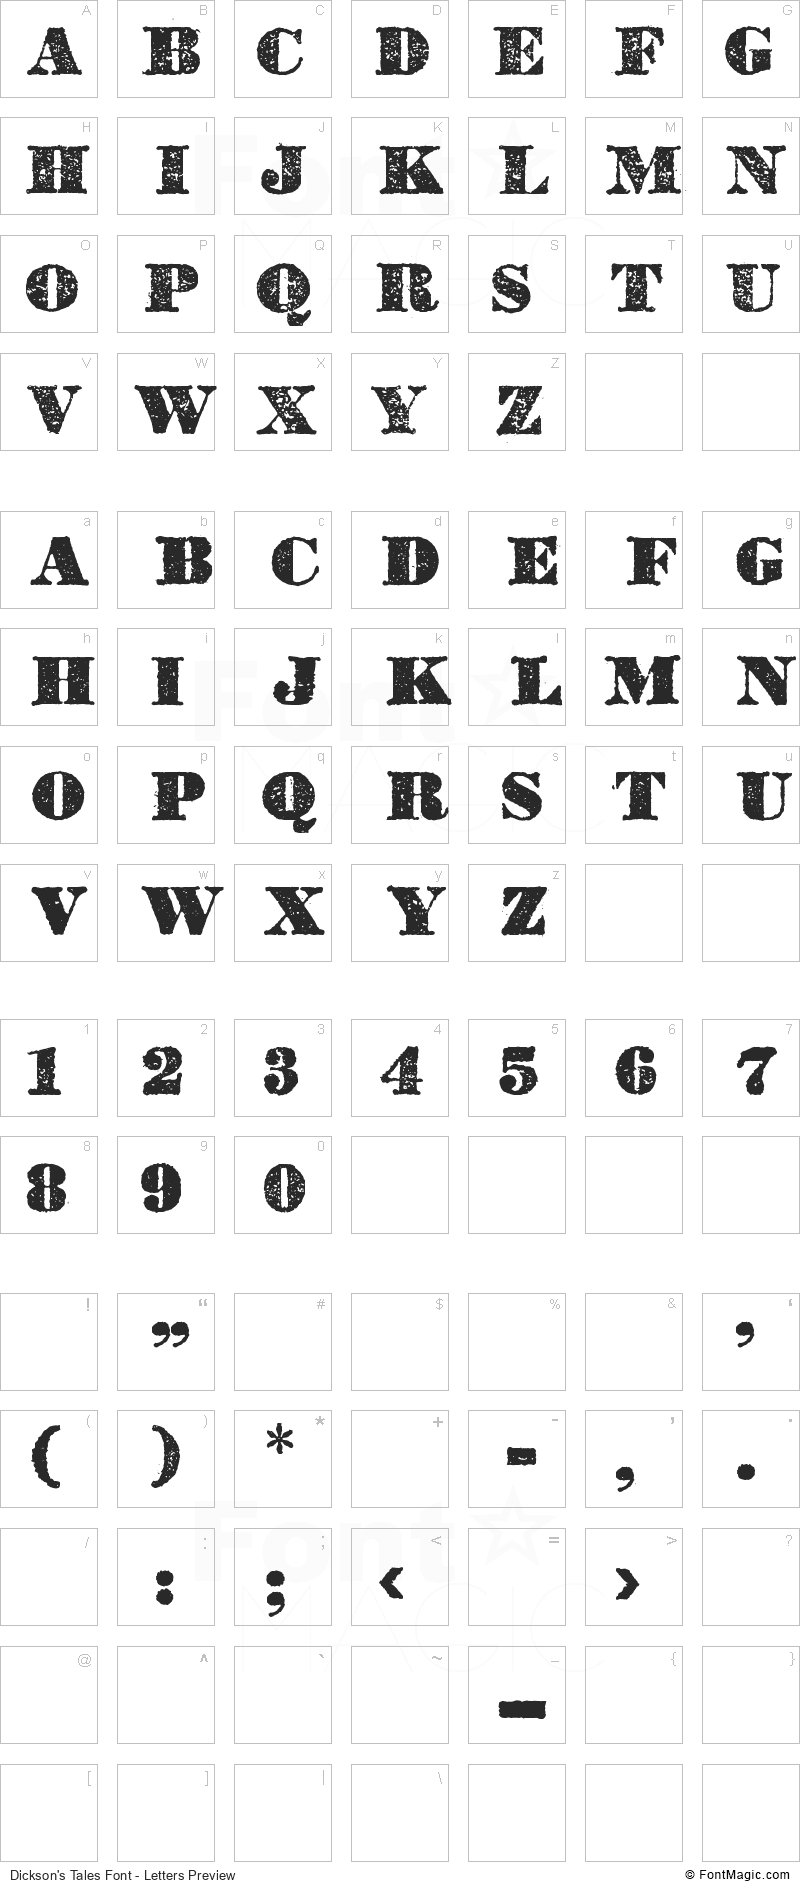 Dickson’s Tales Font - All Latters Preview Chart